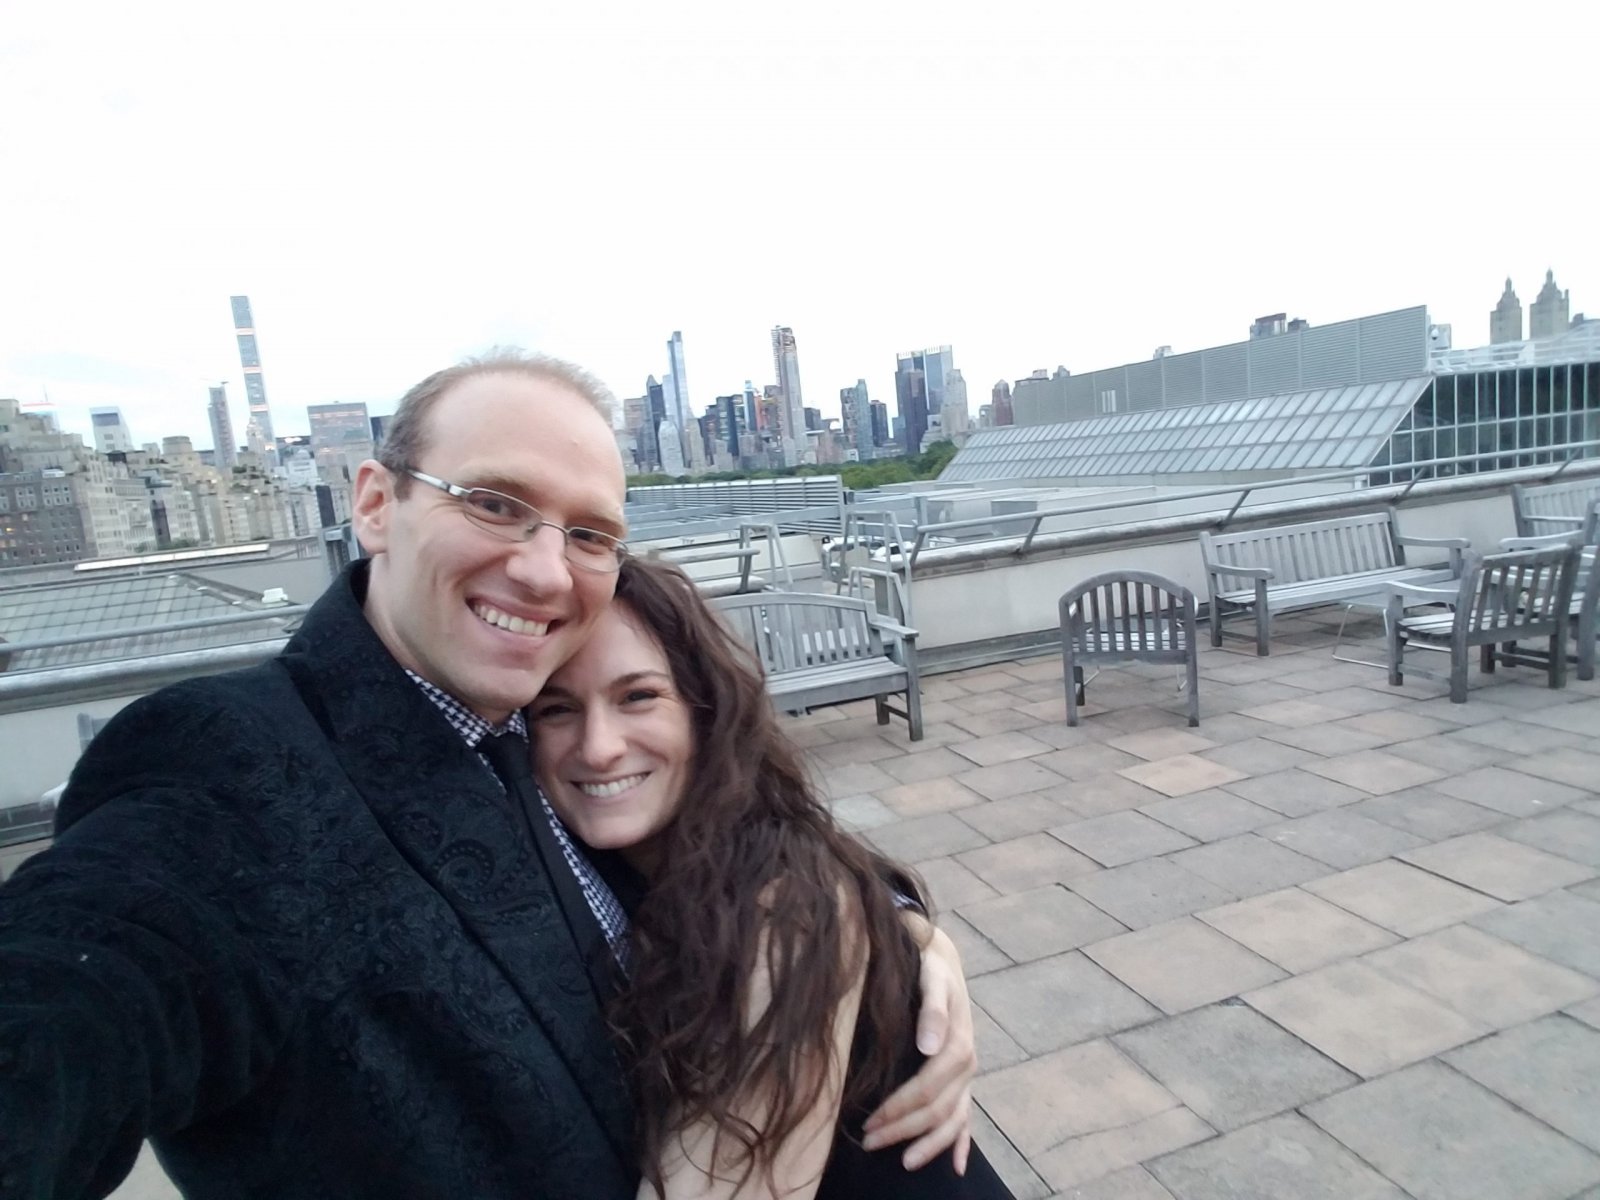 Hanging at the Met Museum Rooftop after an event.